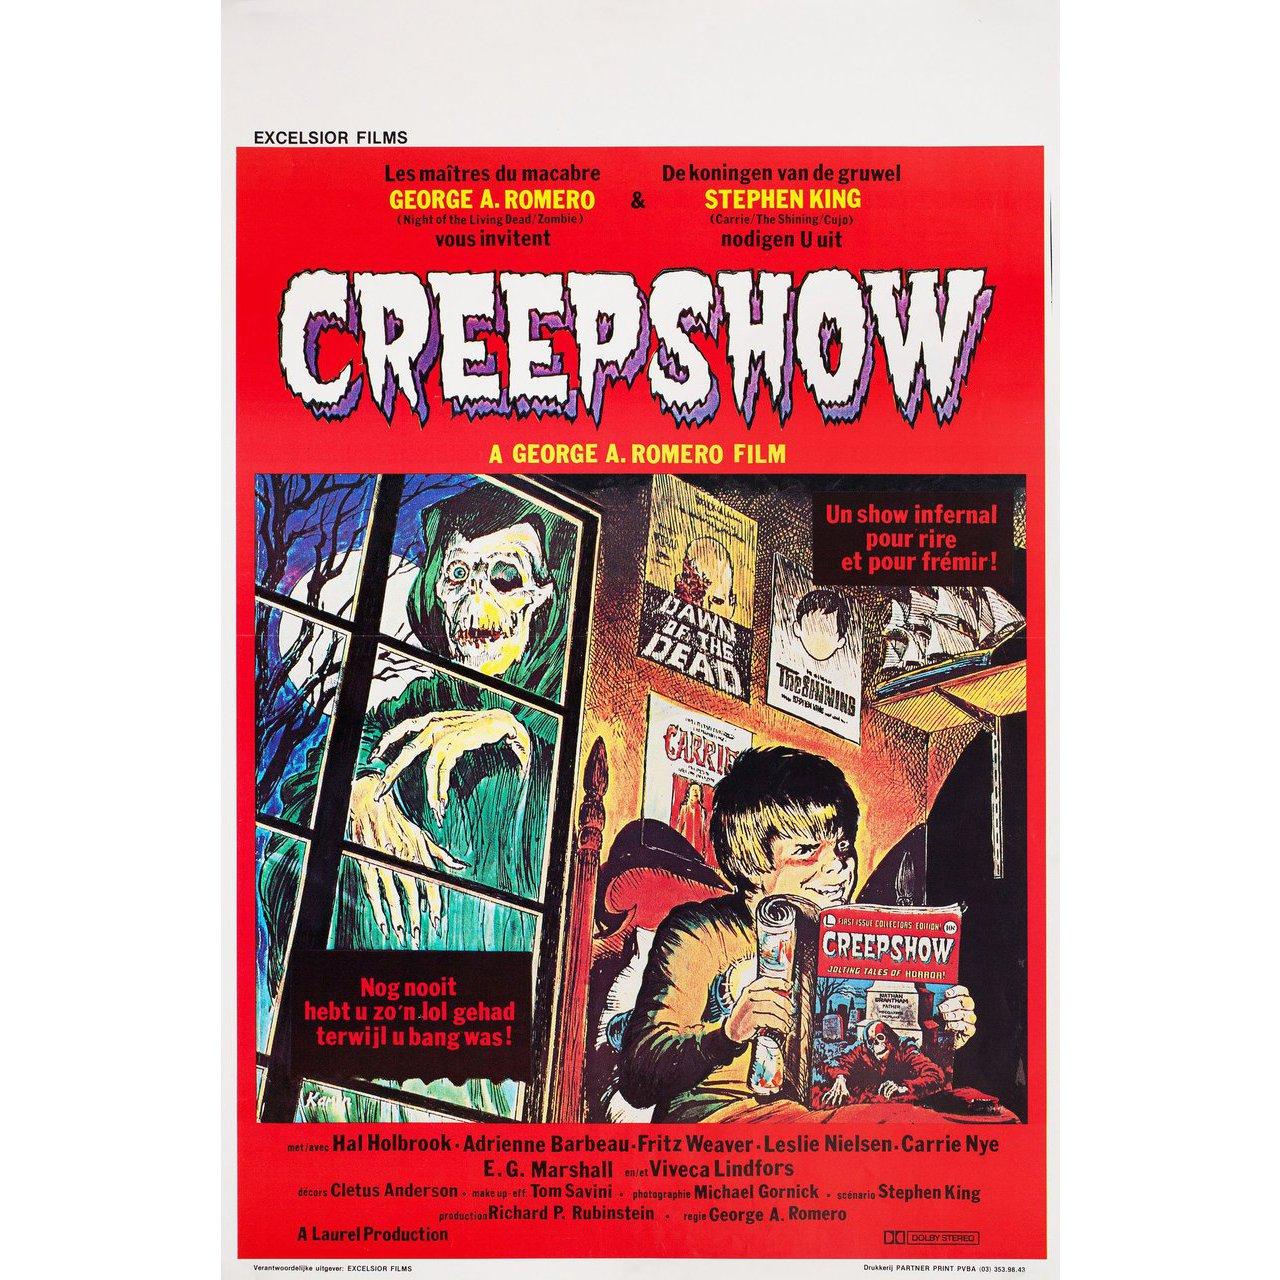 Original 1982 Belgian poster by Jack Kamen for the film Creepshow directed by George A. Romero with Hal Holbrook / Adrienne Barbeau / Fritz Weaver / Leslie Nielsen. Very good-fine condition, folded. Many original posters were issued folded or were